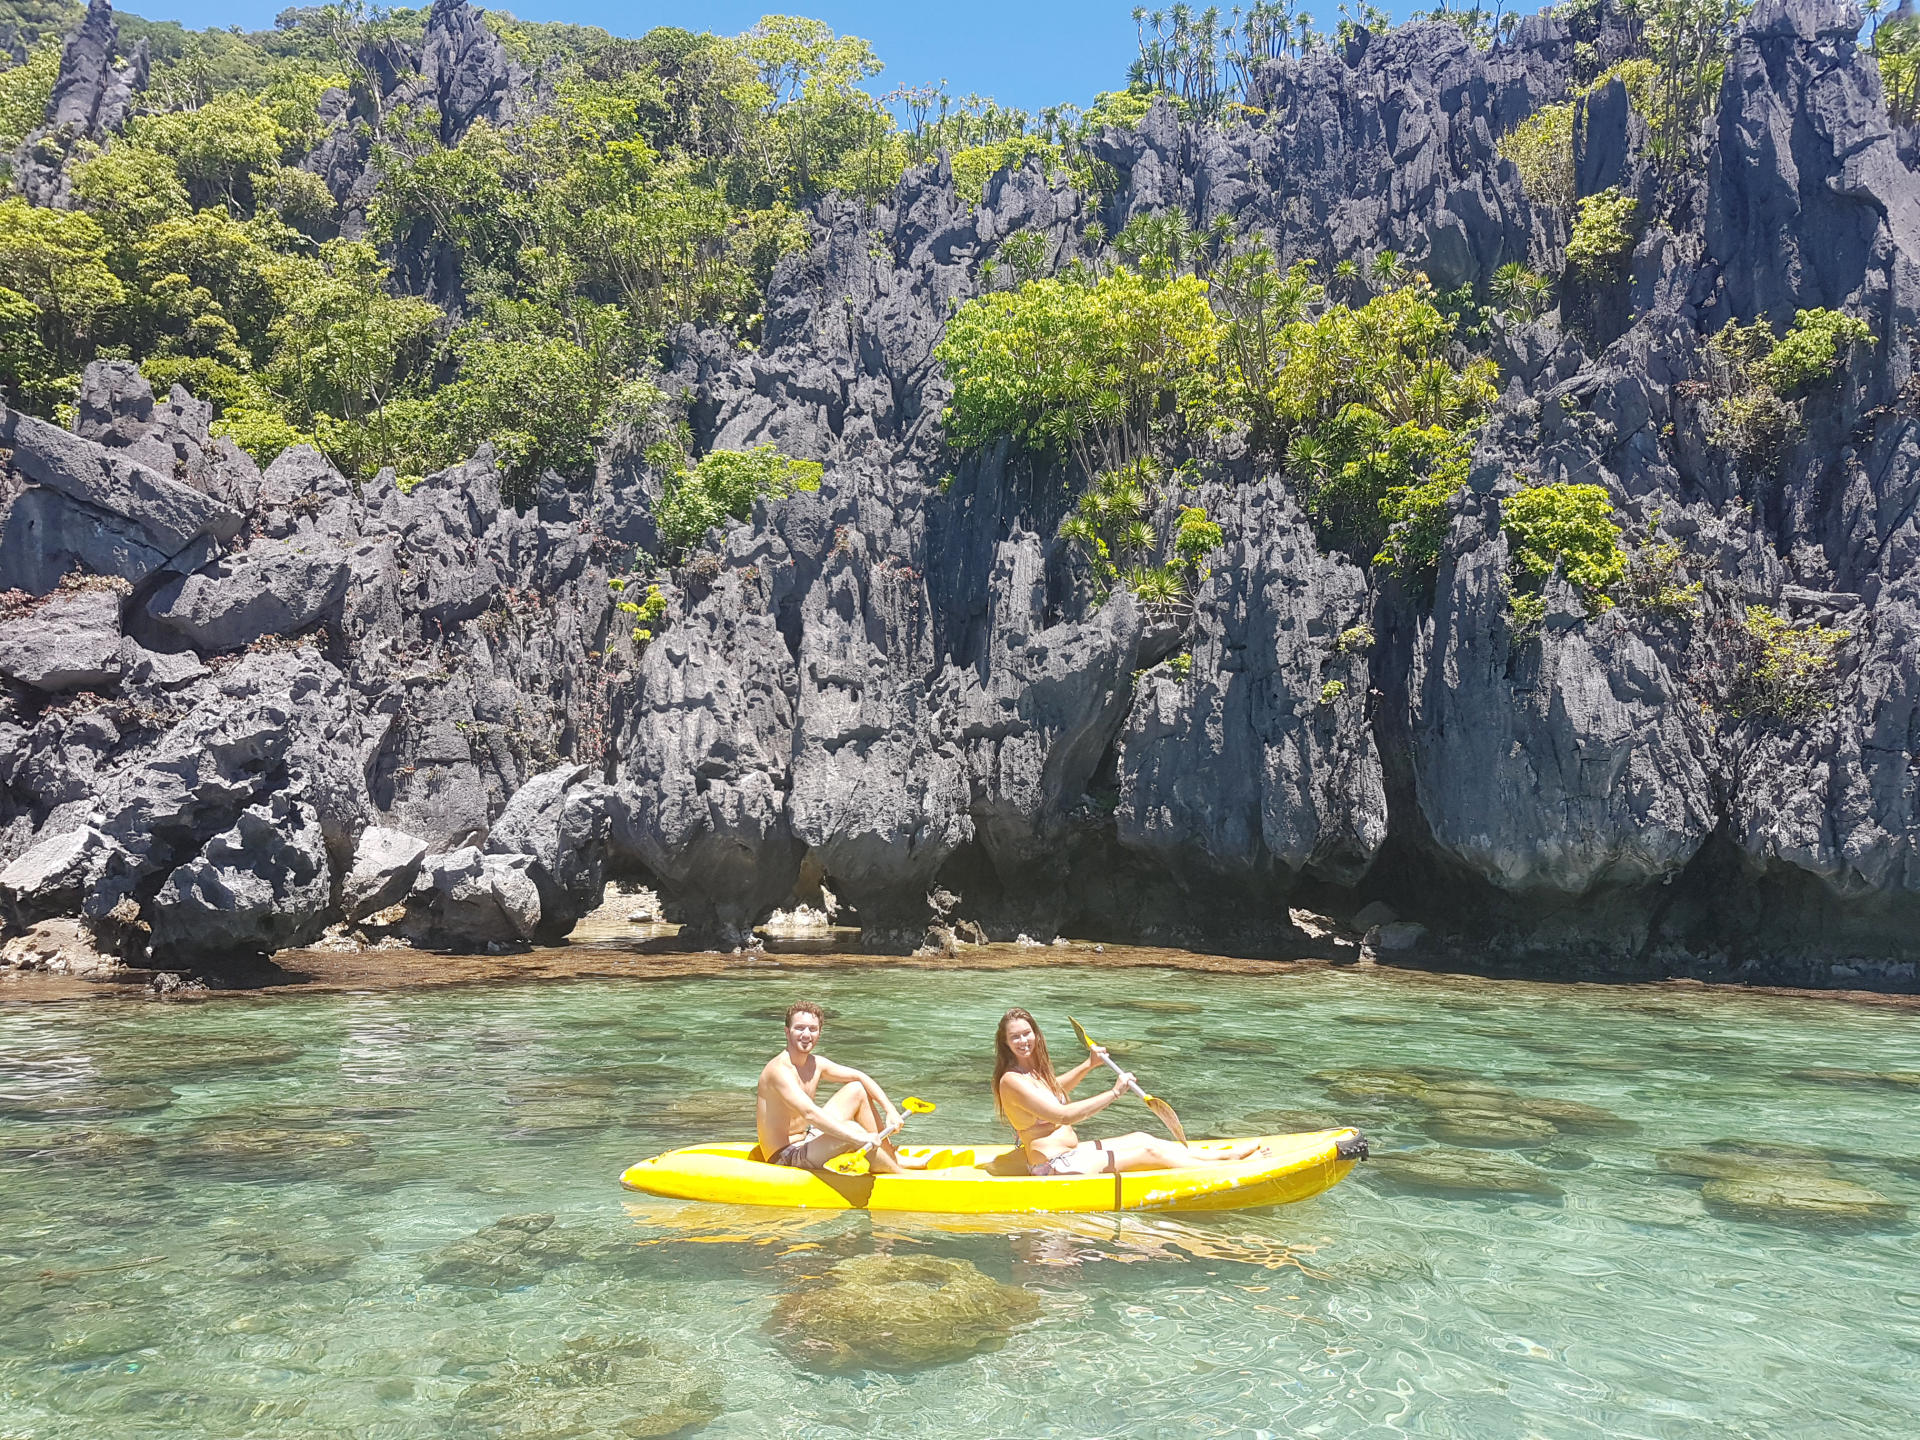 Kayaking in the clear waters of Small Lagoon!